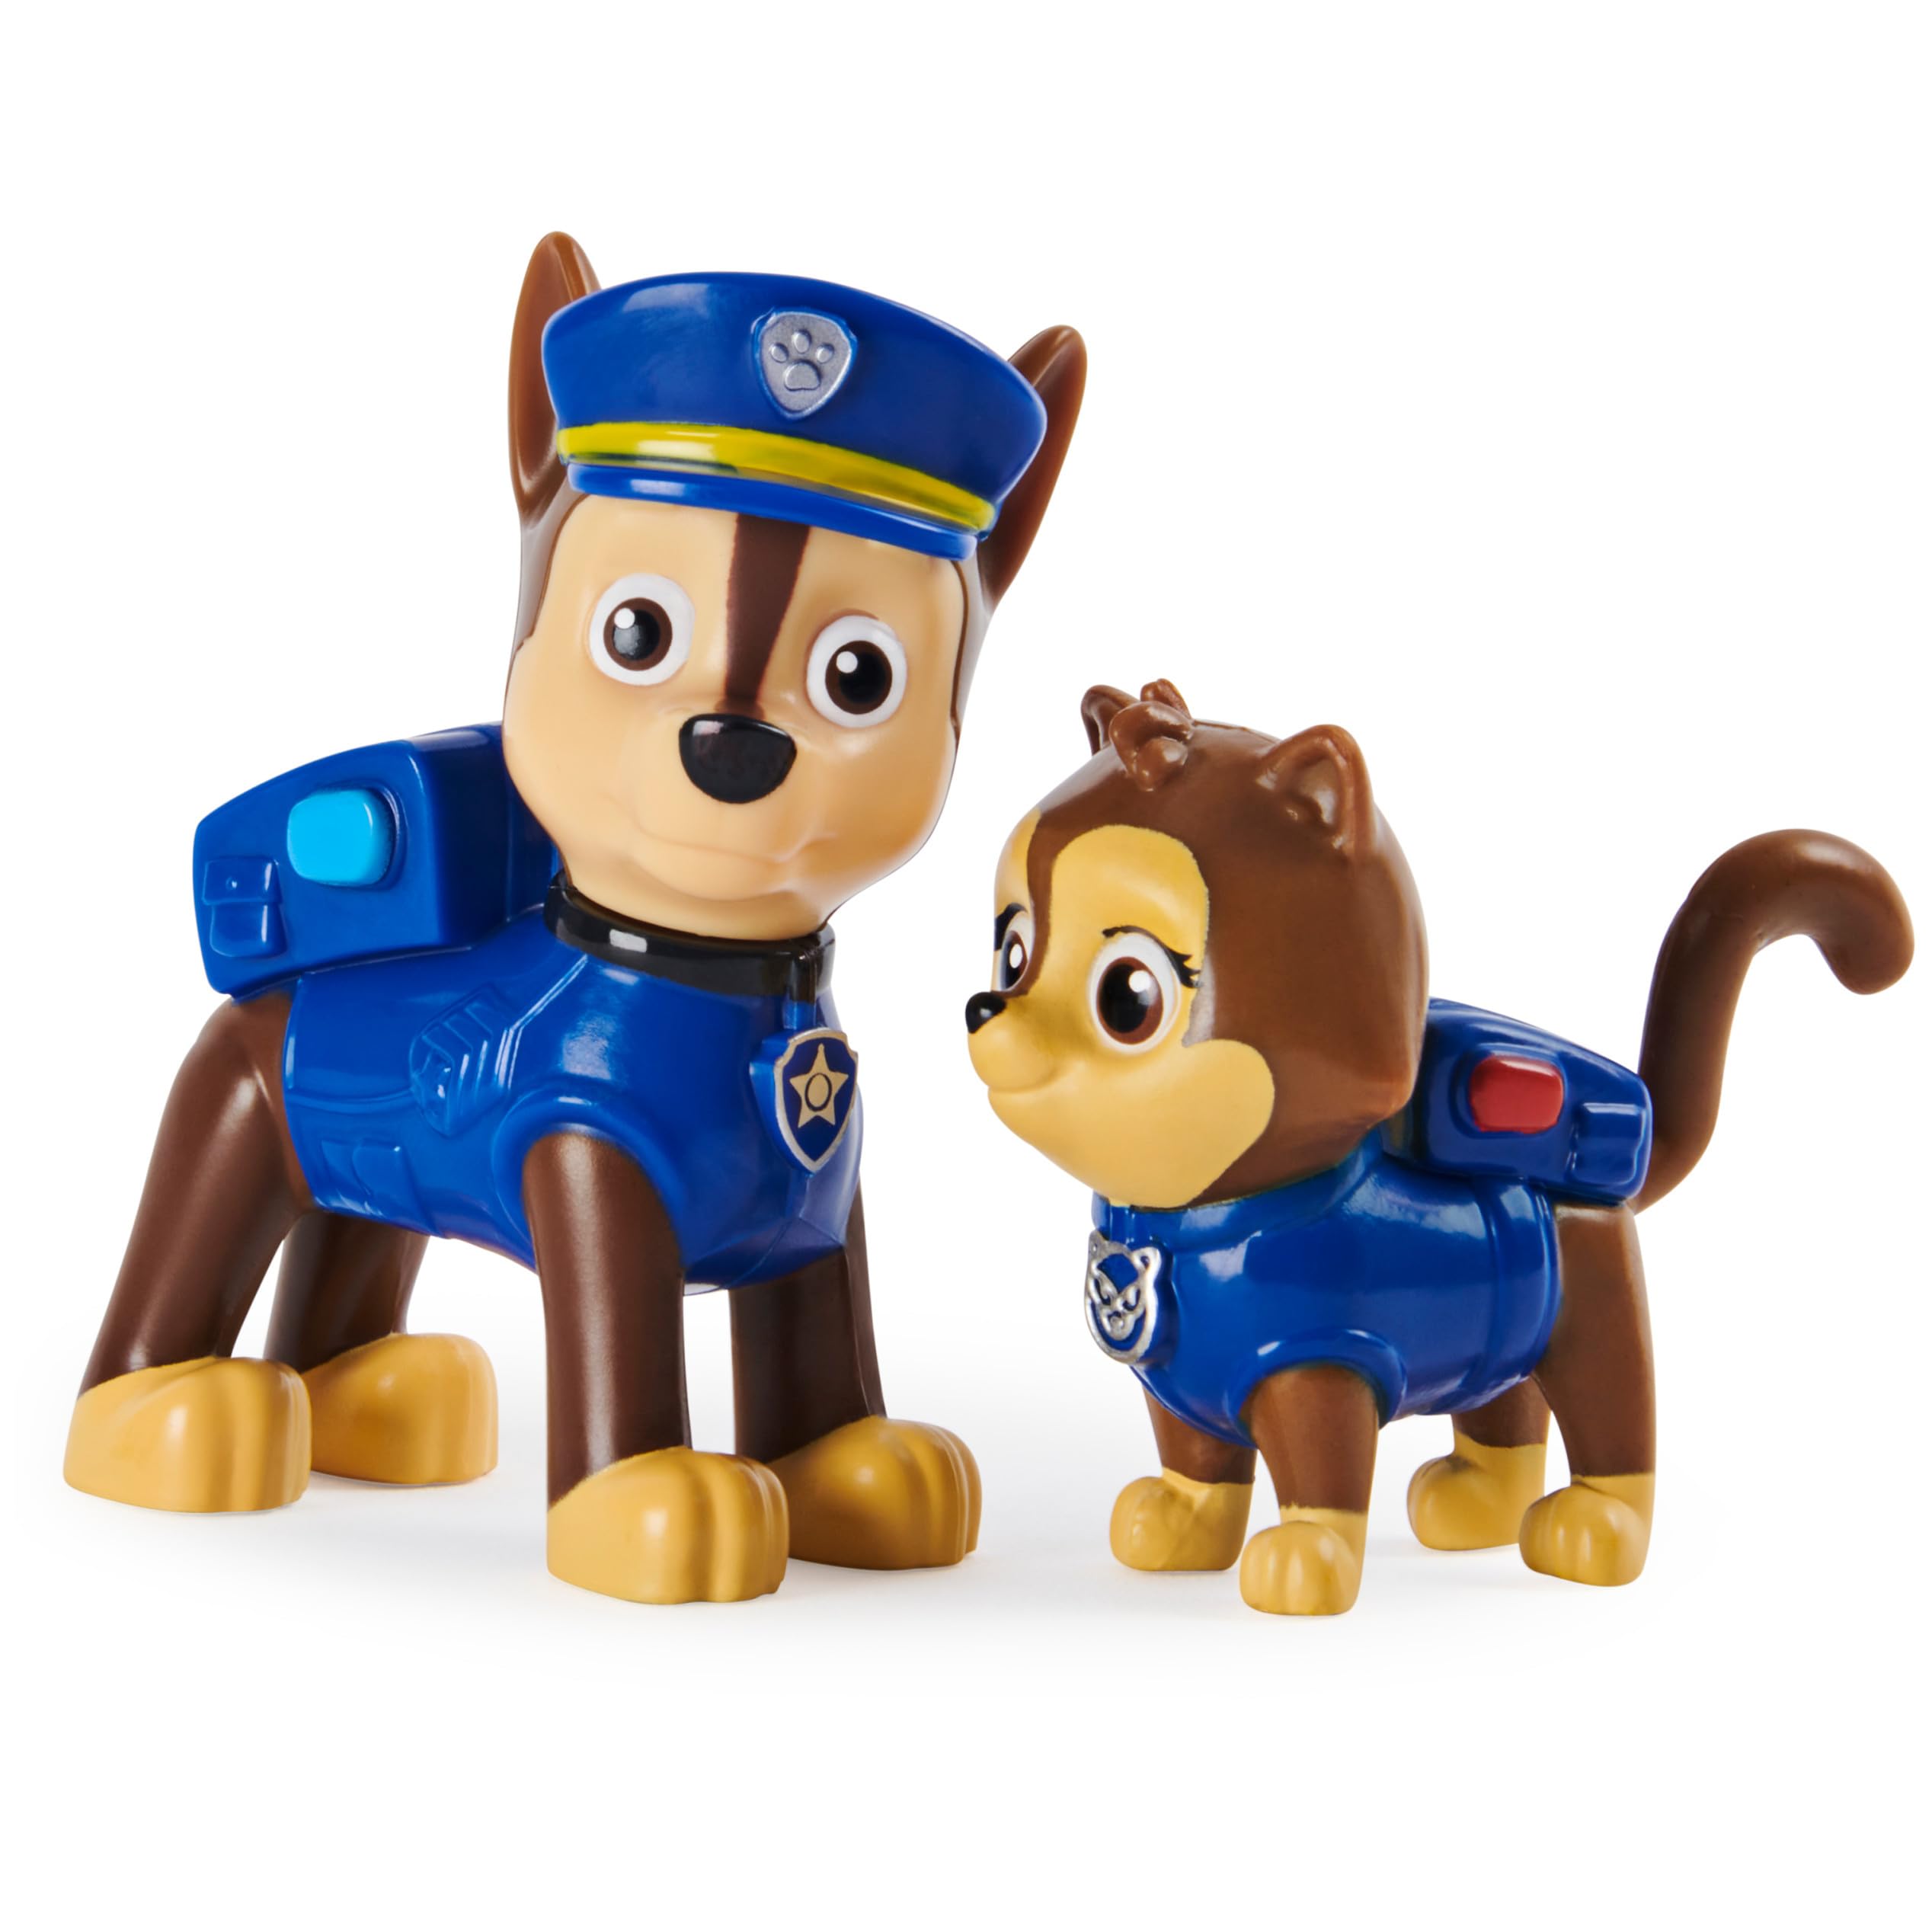 Paw Patrol, Kitty Catastrophe Gift Set with 8 Collectible Toy Figures, for Kids Aged 3 and Up